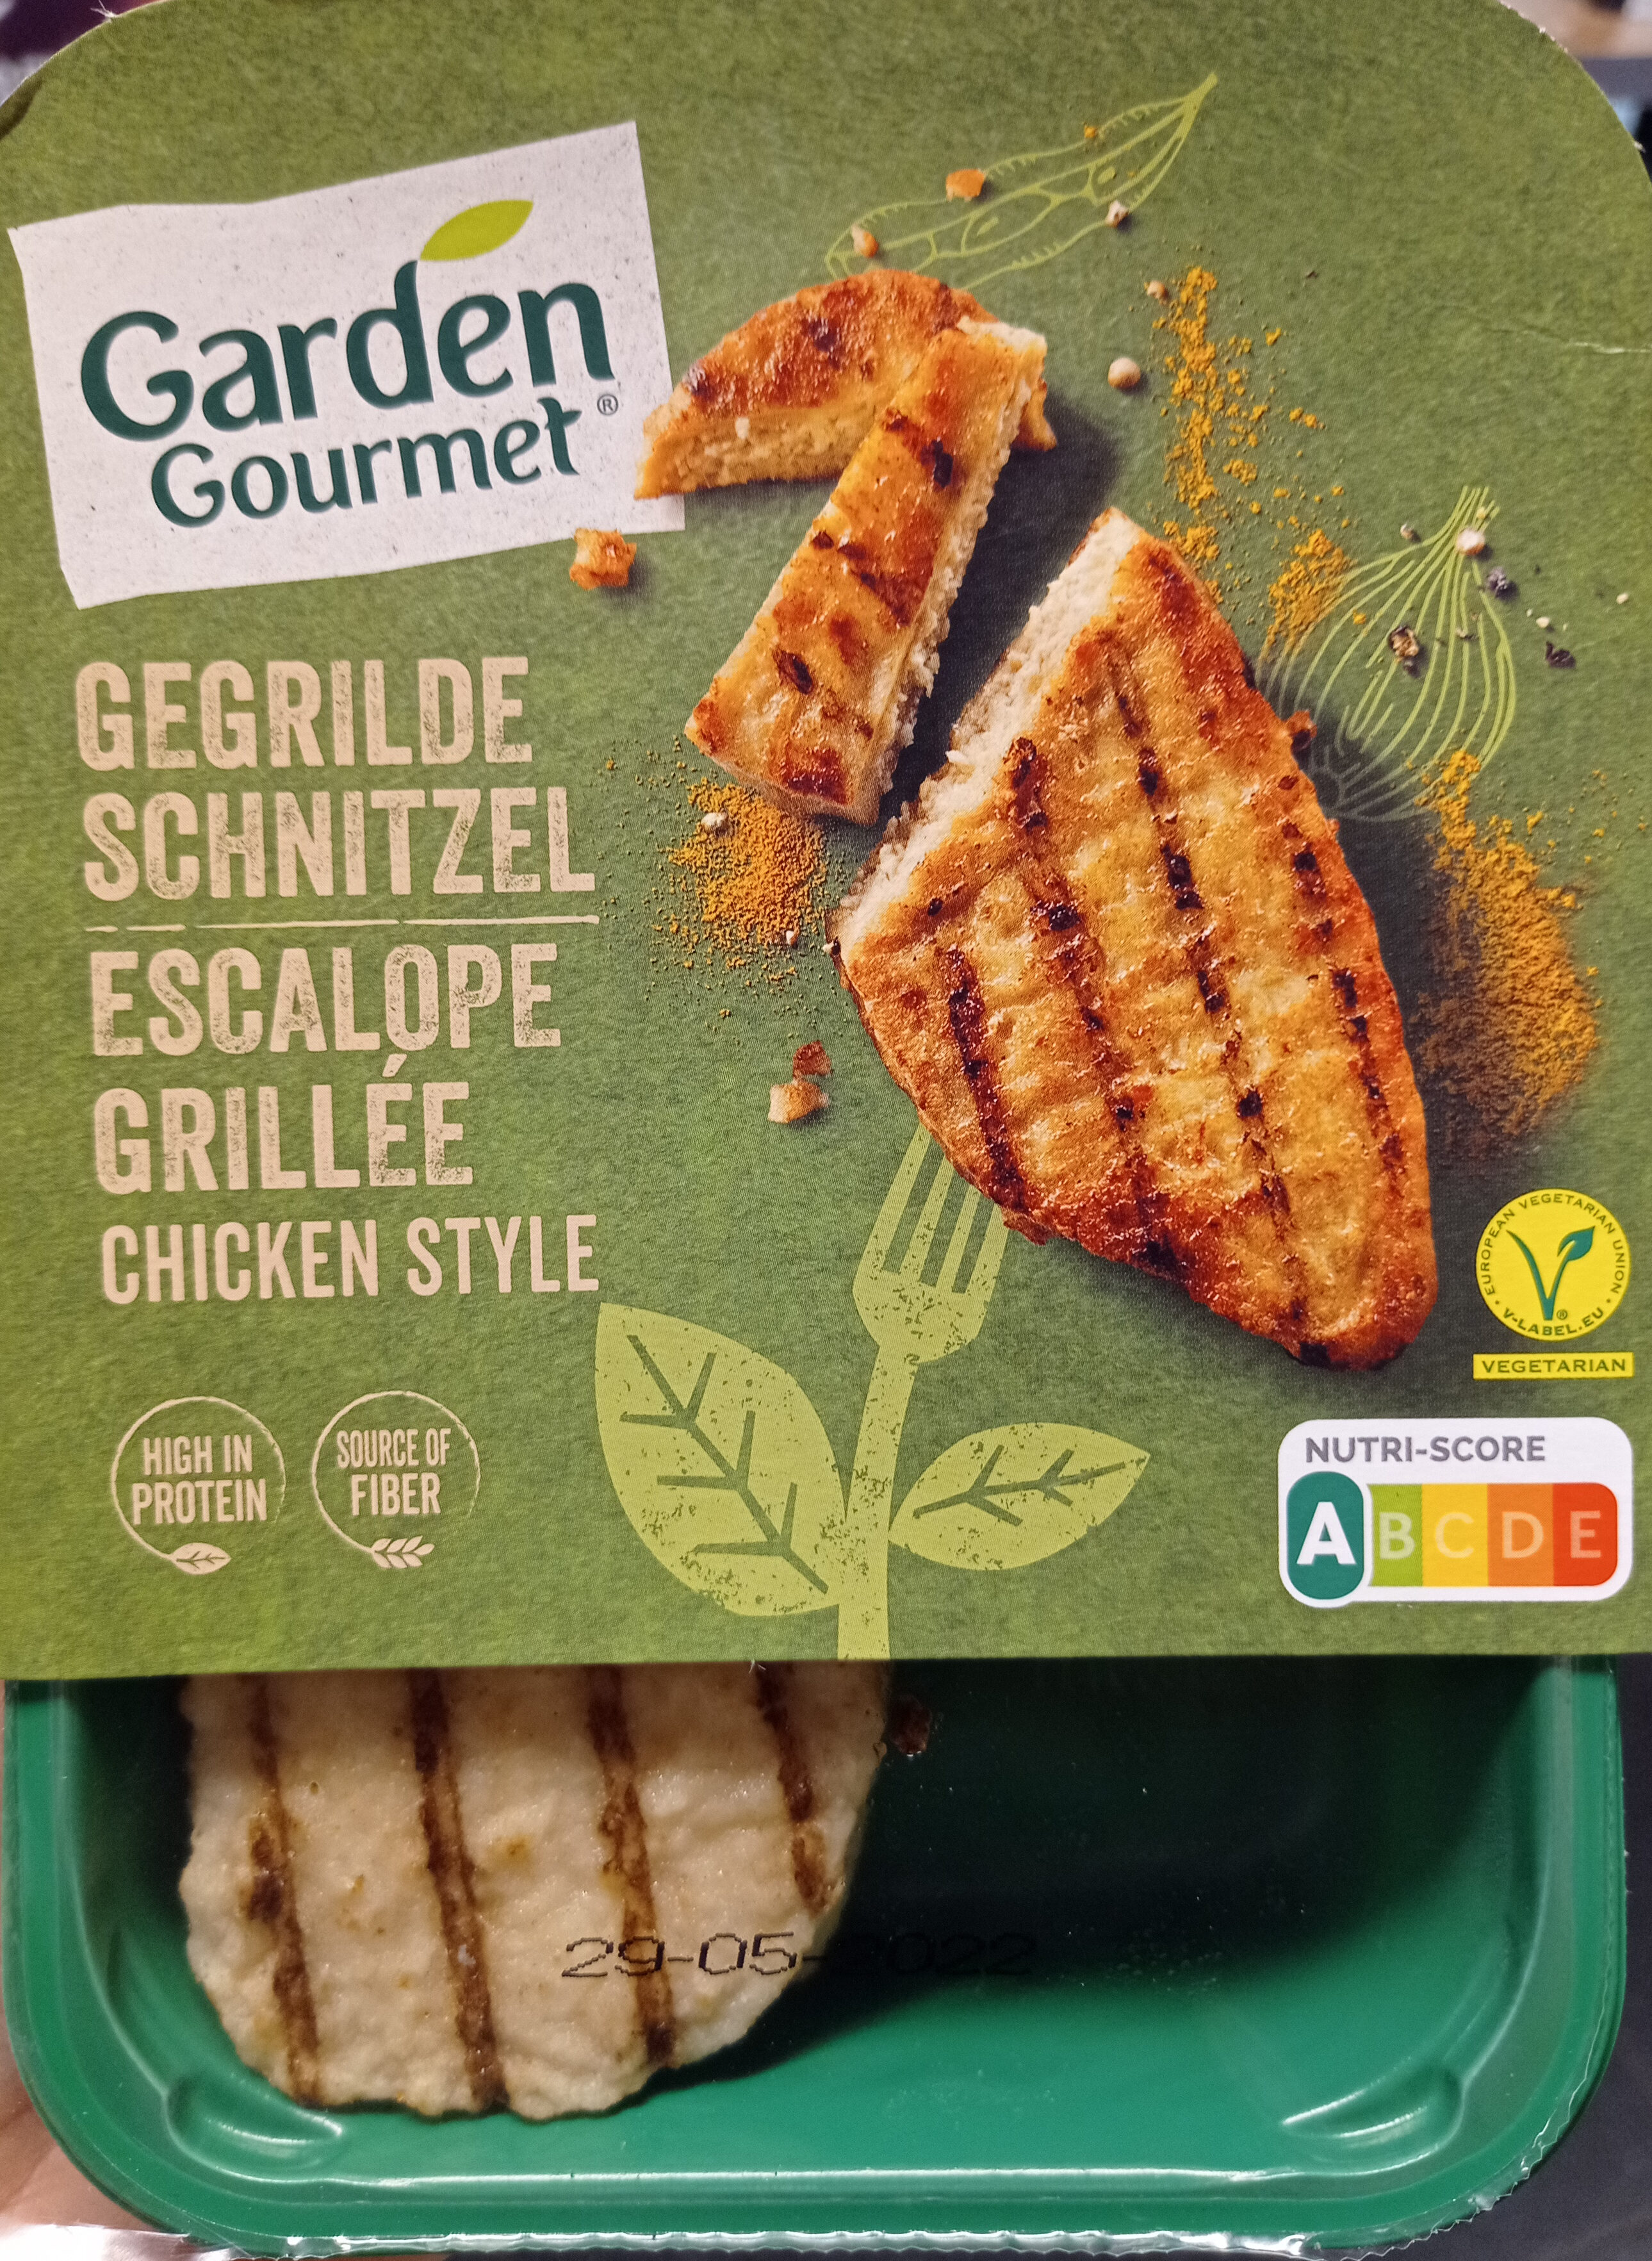 Escalope grillée chicken style - Product - fr